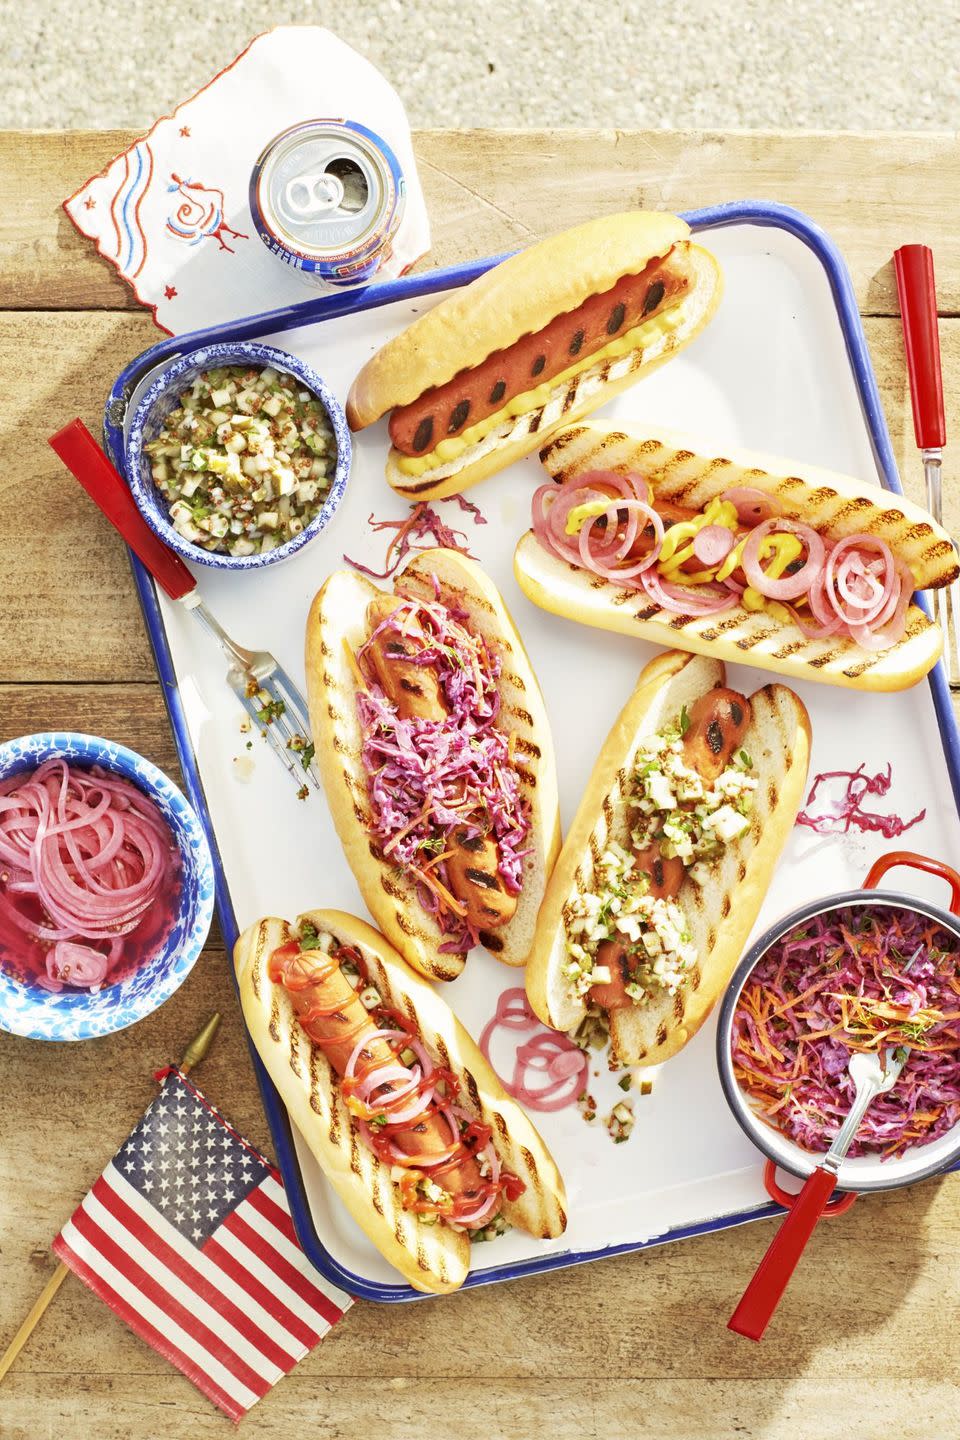 Grilled Hot Dogs with Fixin's